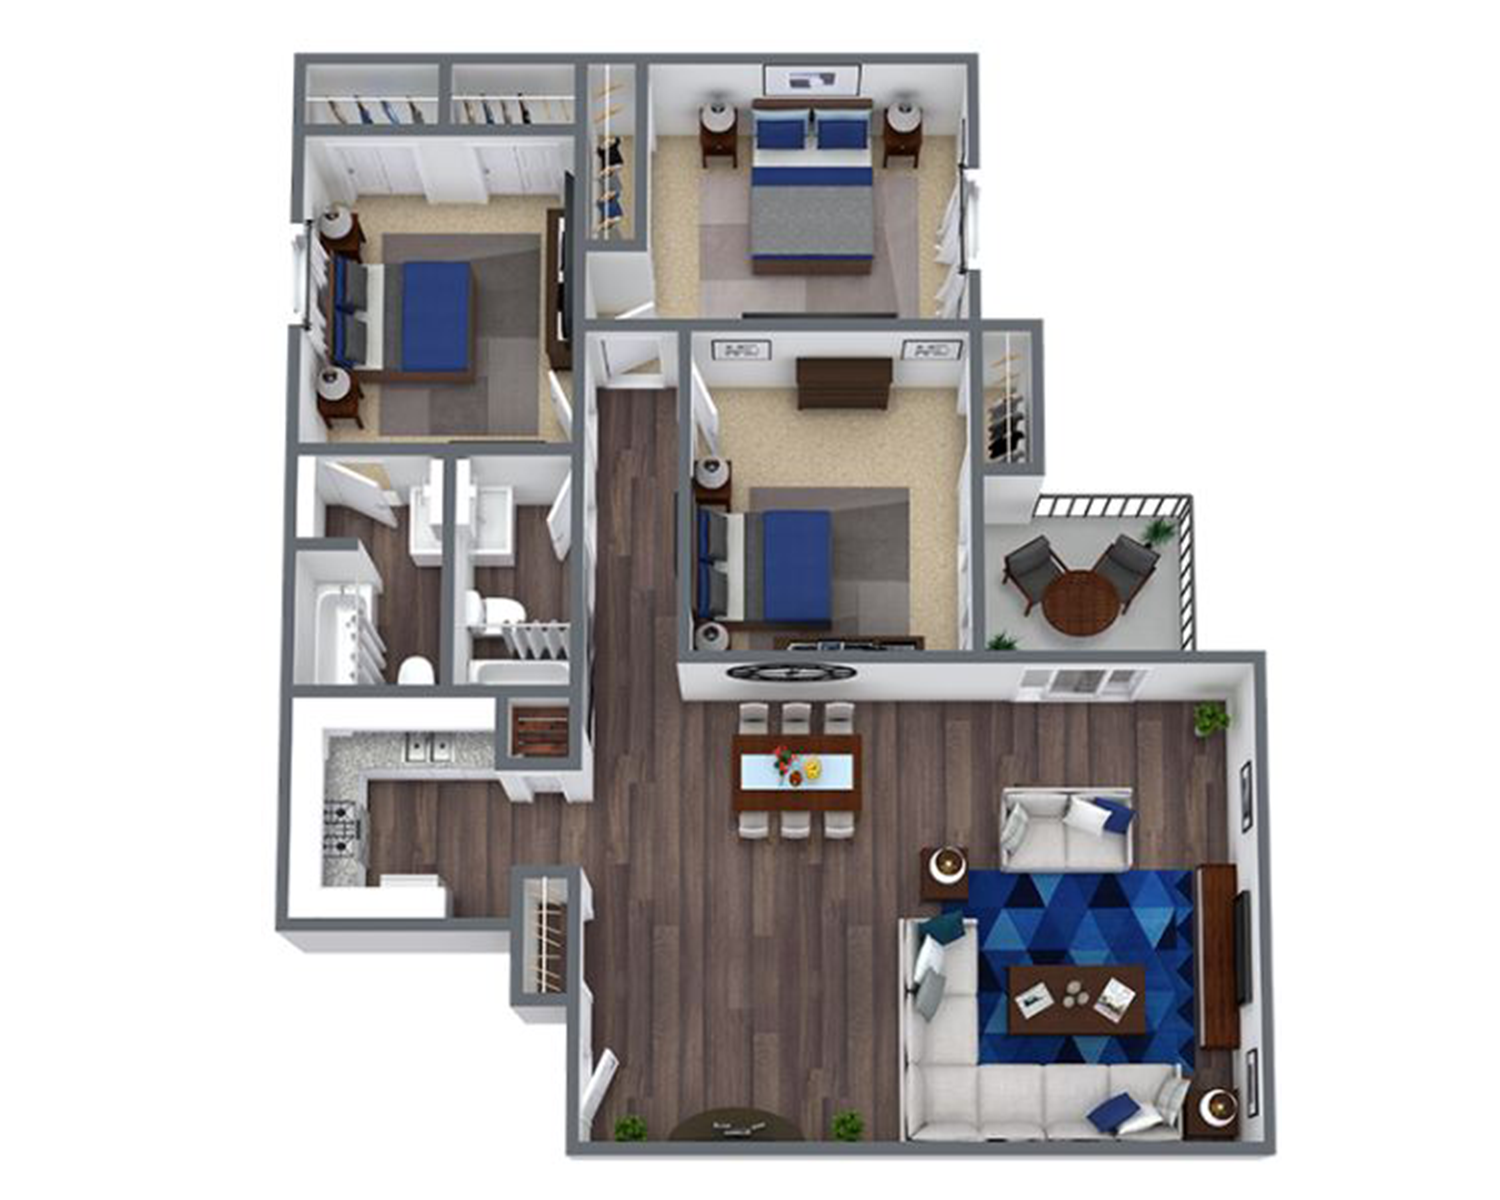 three bed two bath apartment floor plan at 1,212 square feet